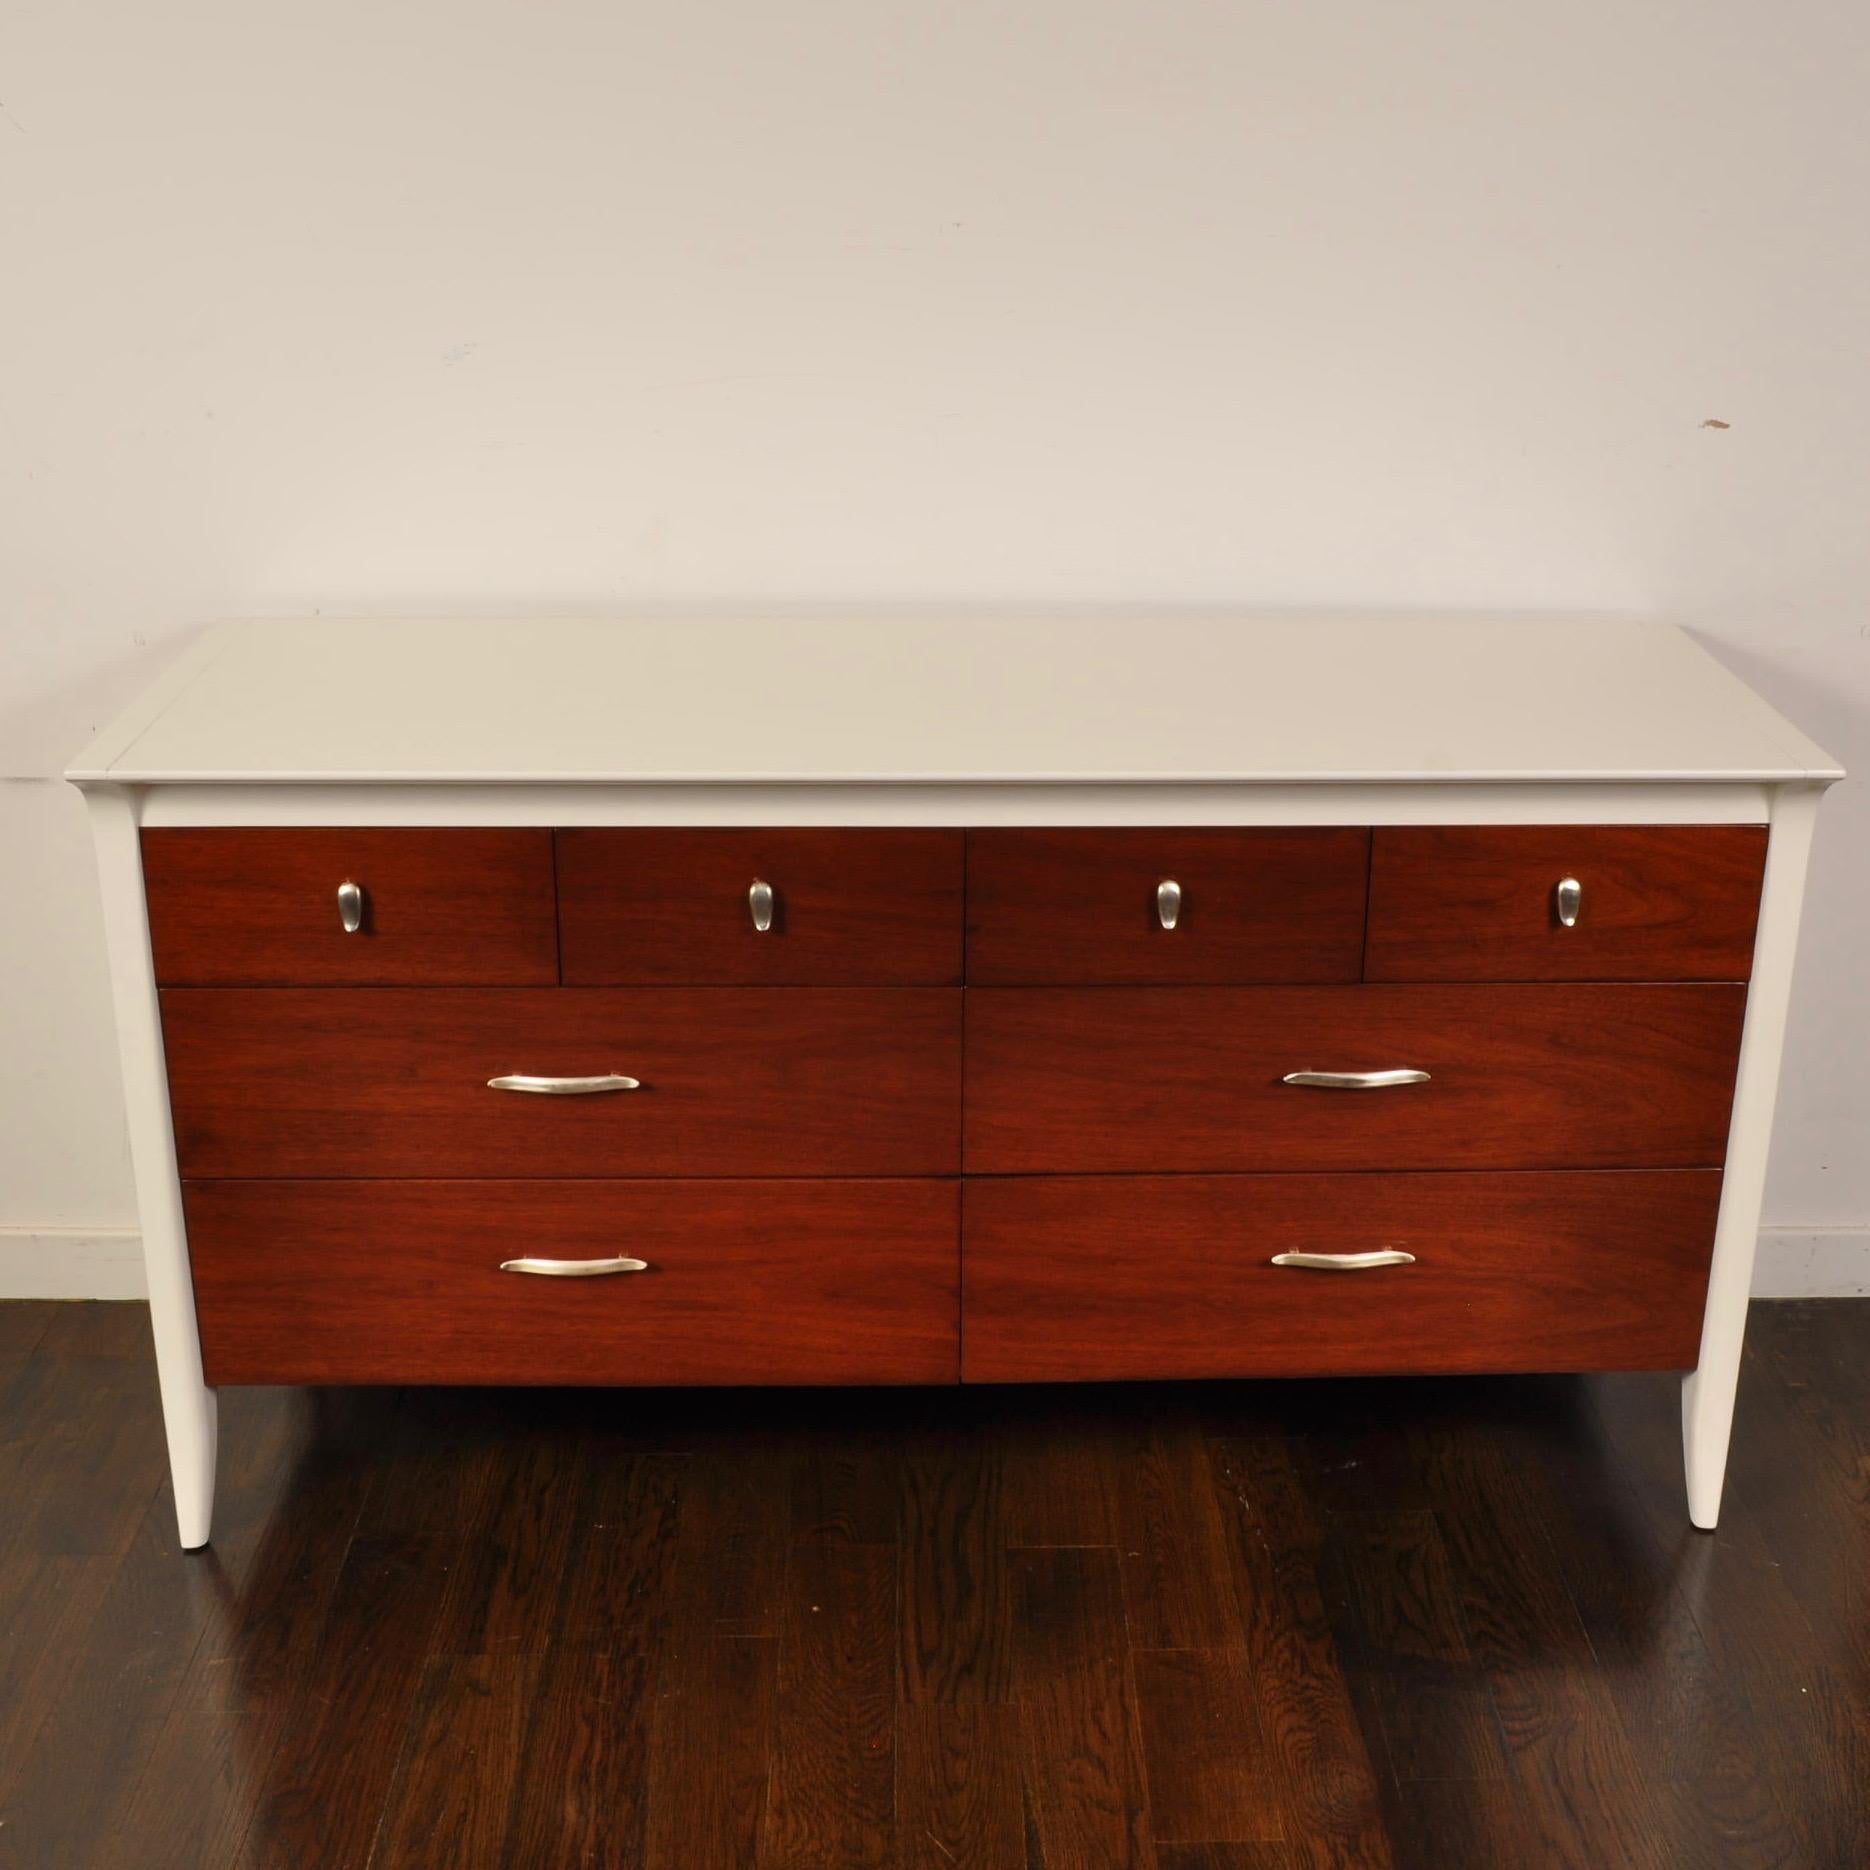 Part of the Profile line designed by John Van Koert for Drexel, this nightstand and matching 8 drawer dresser has been refinished in a two-toned walnut and satin finish white dove lacquer.